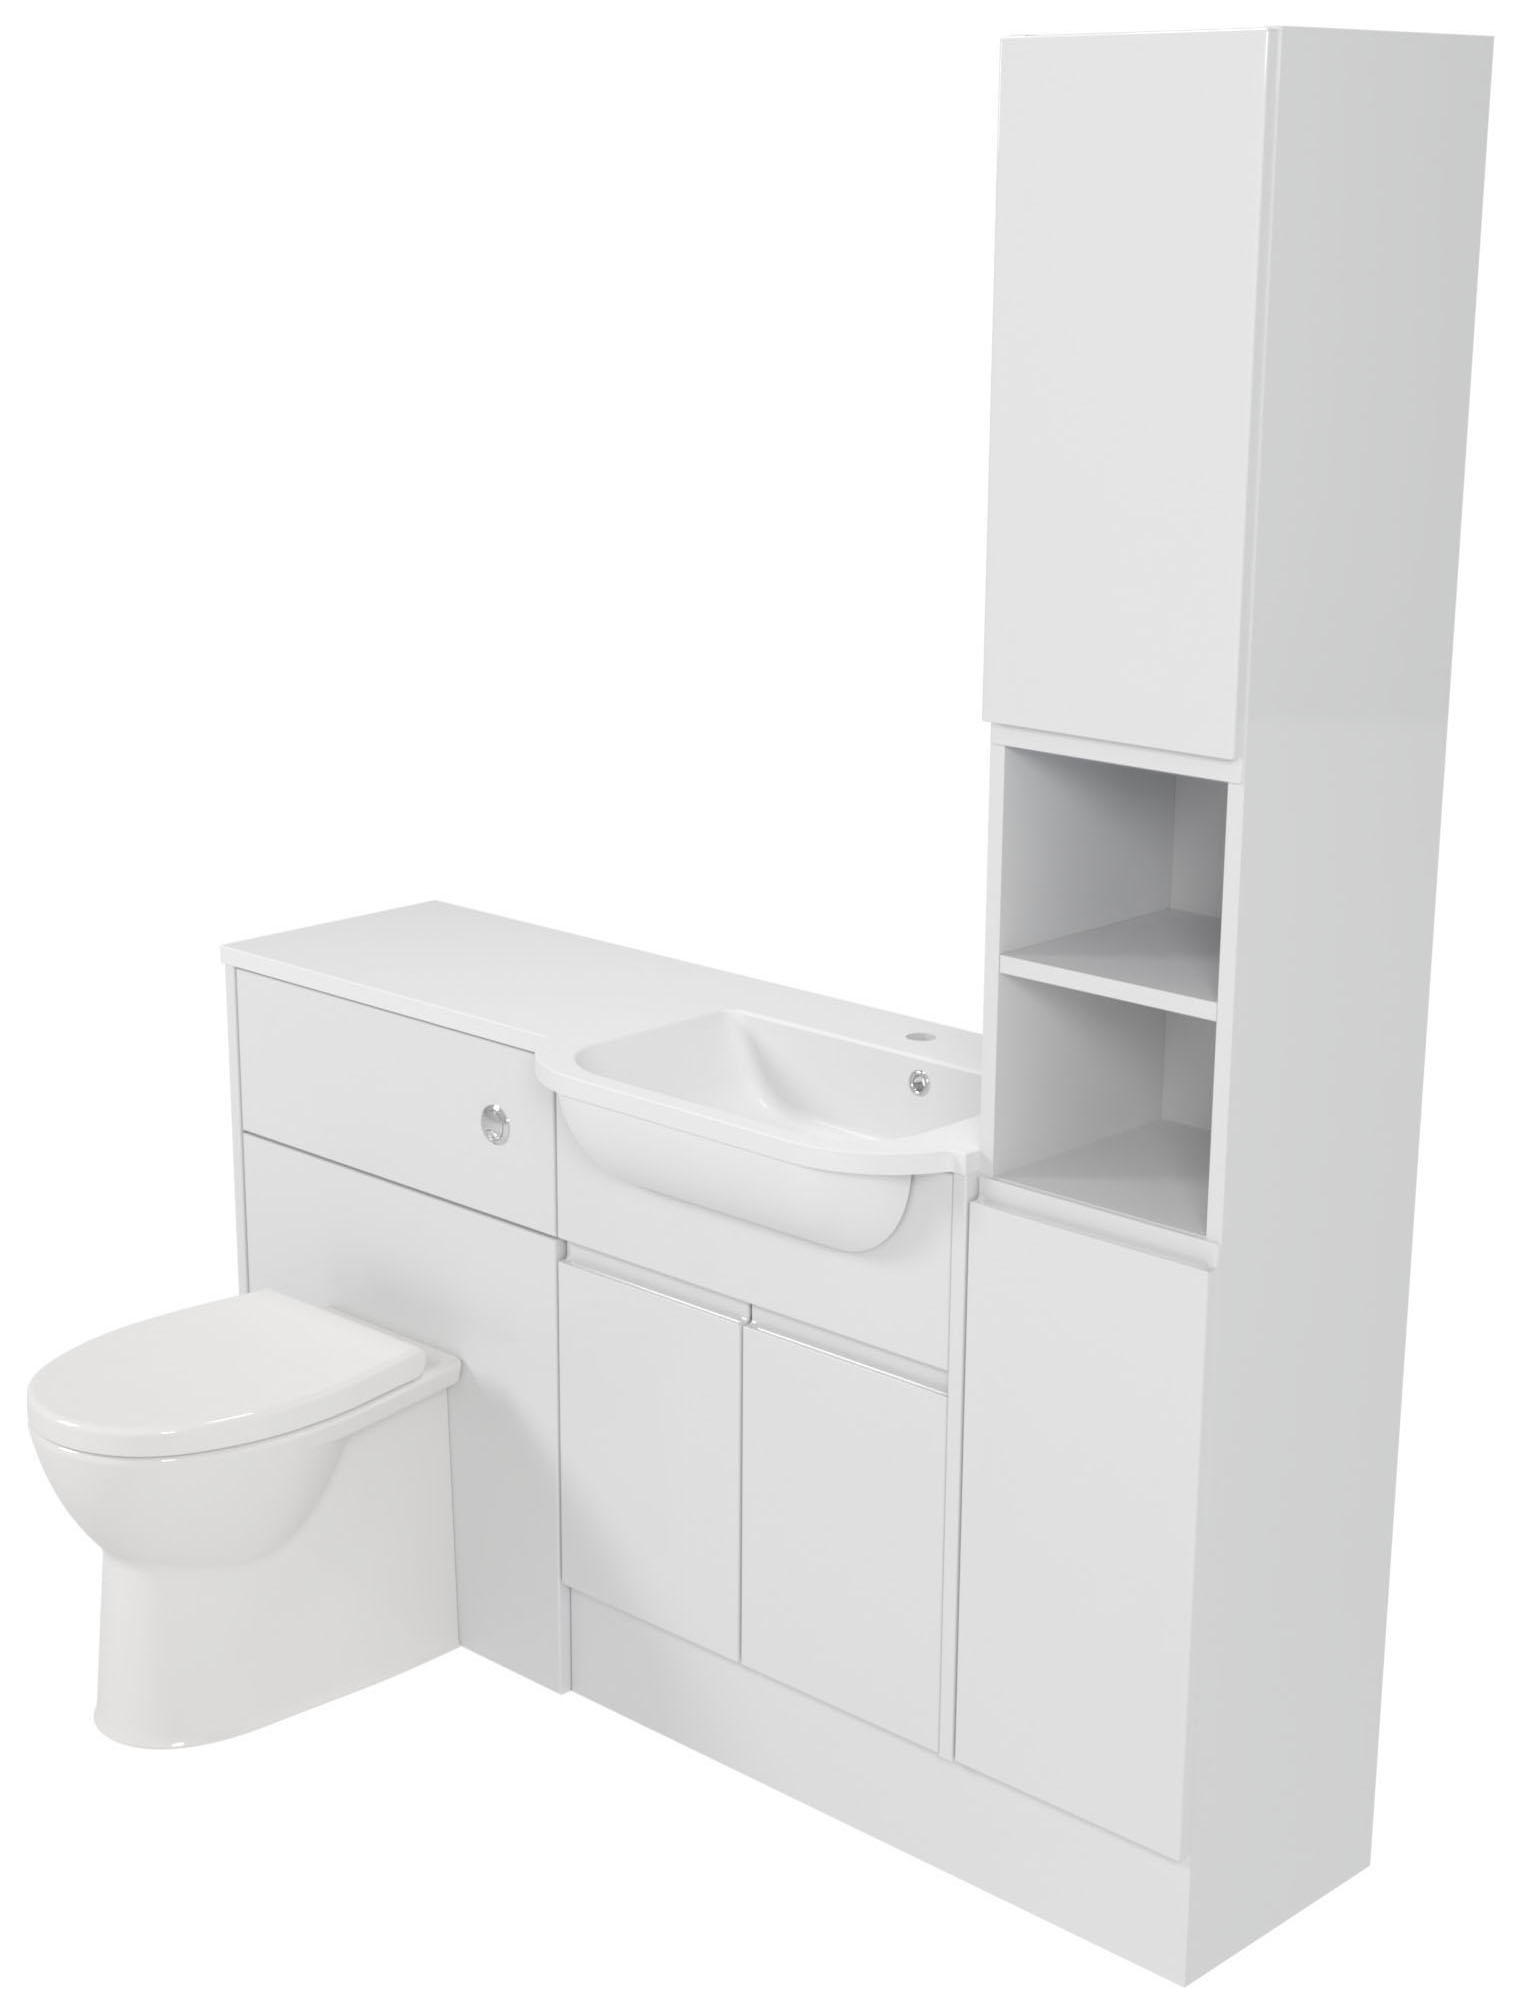 Deccado Clifton Bright White 1500mm Fitted Tower, Vanity & Toilet Pan Unit Combination with Basin